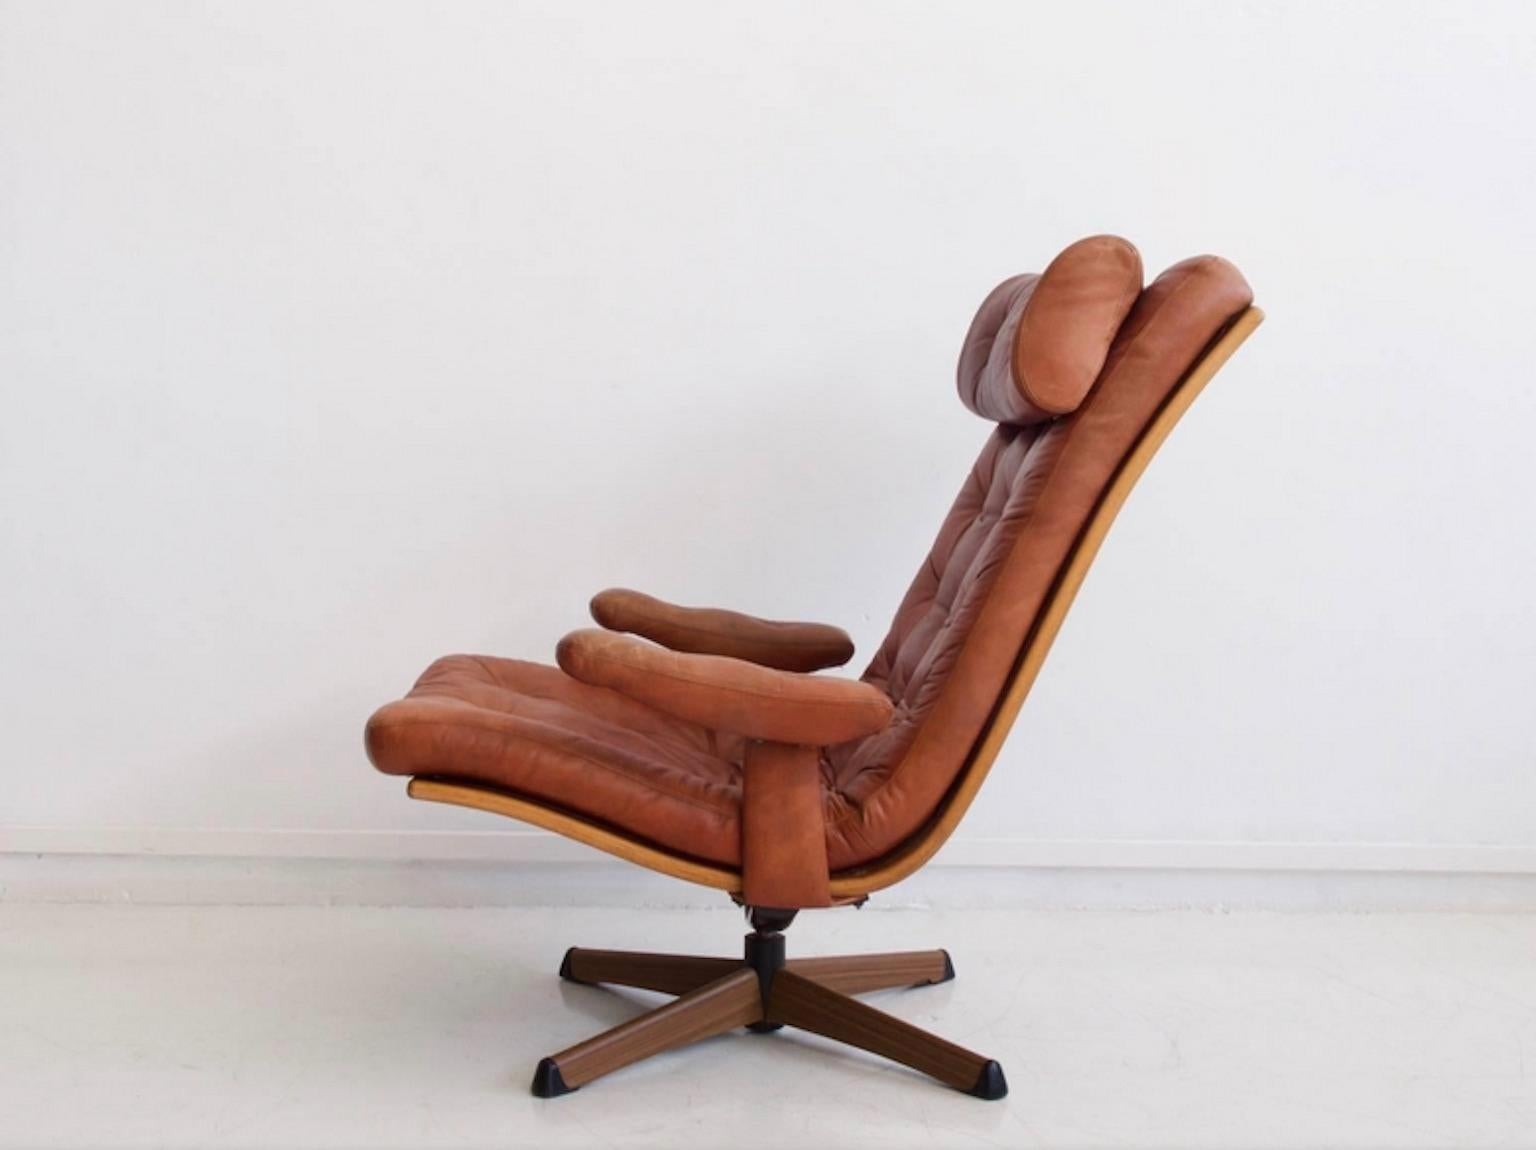 Easy chair by Göte Möbler. Button tufted brown leather upholstered seat and armrests. Leather with slight age-related patina. Frame of wood and steel. Very comfortable seat.